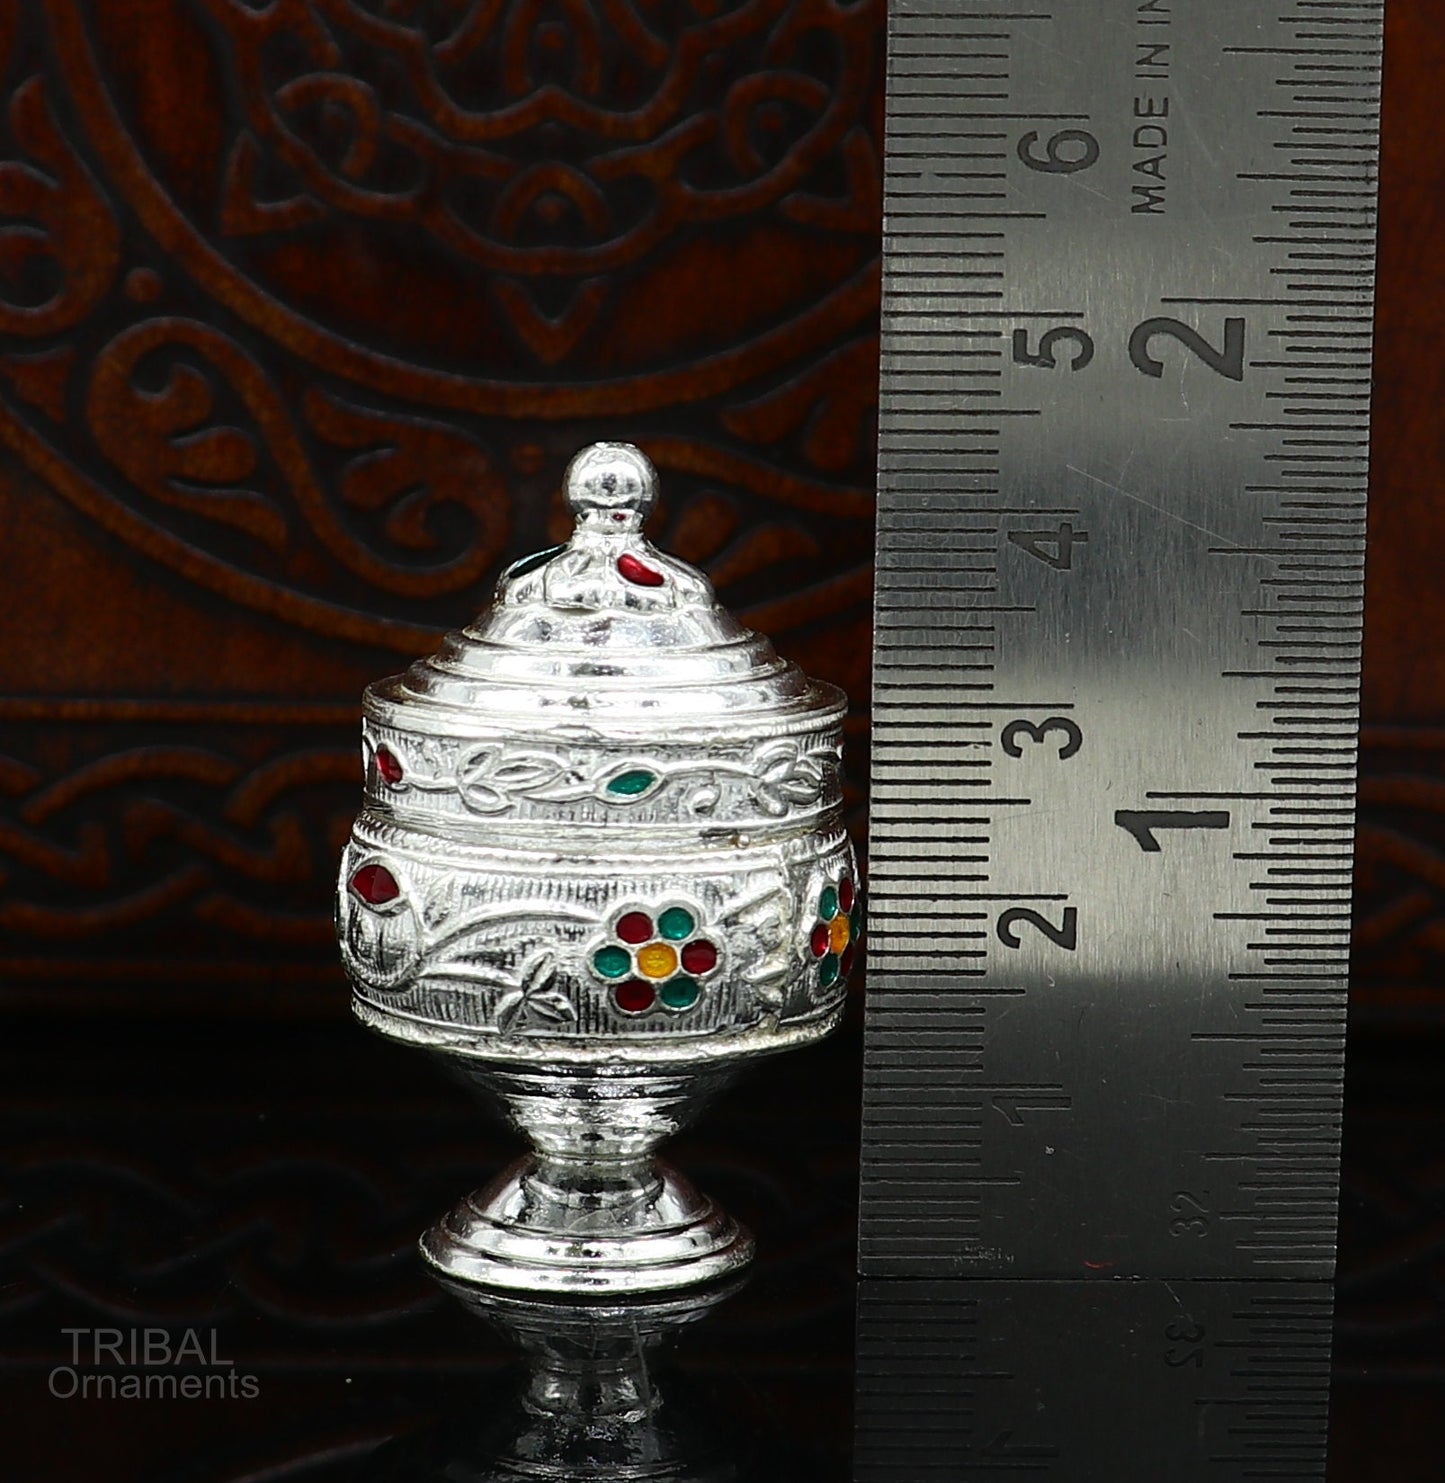 925 Sterling silver handmade fabulous trinket box, solid container box, casket box, sindoor box, enamel work customized gifting box stb273 - TRIBAL ORNAMENTS